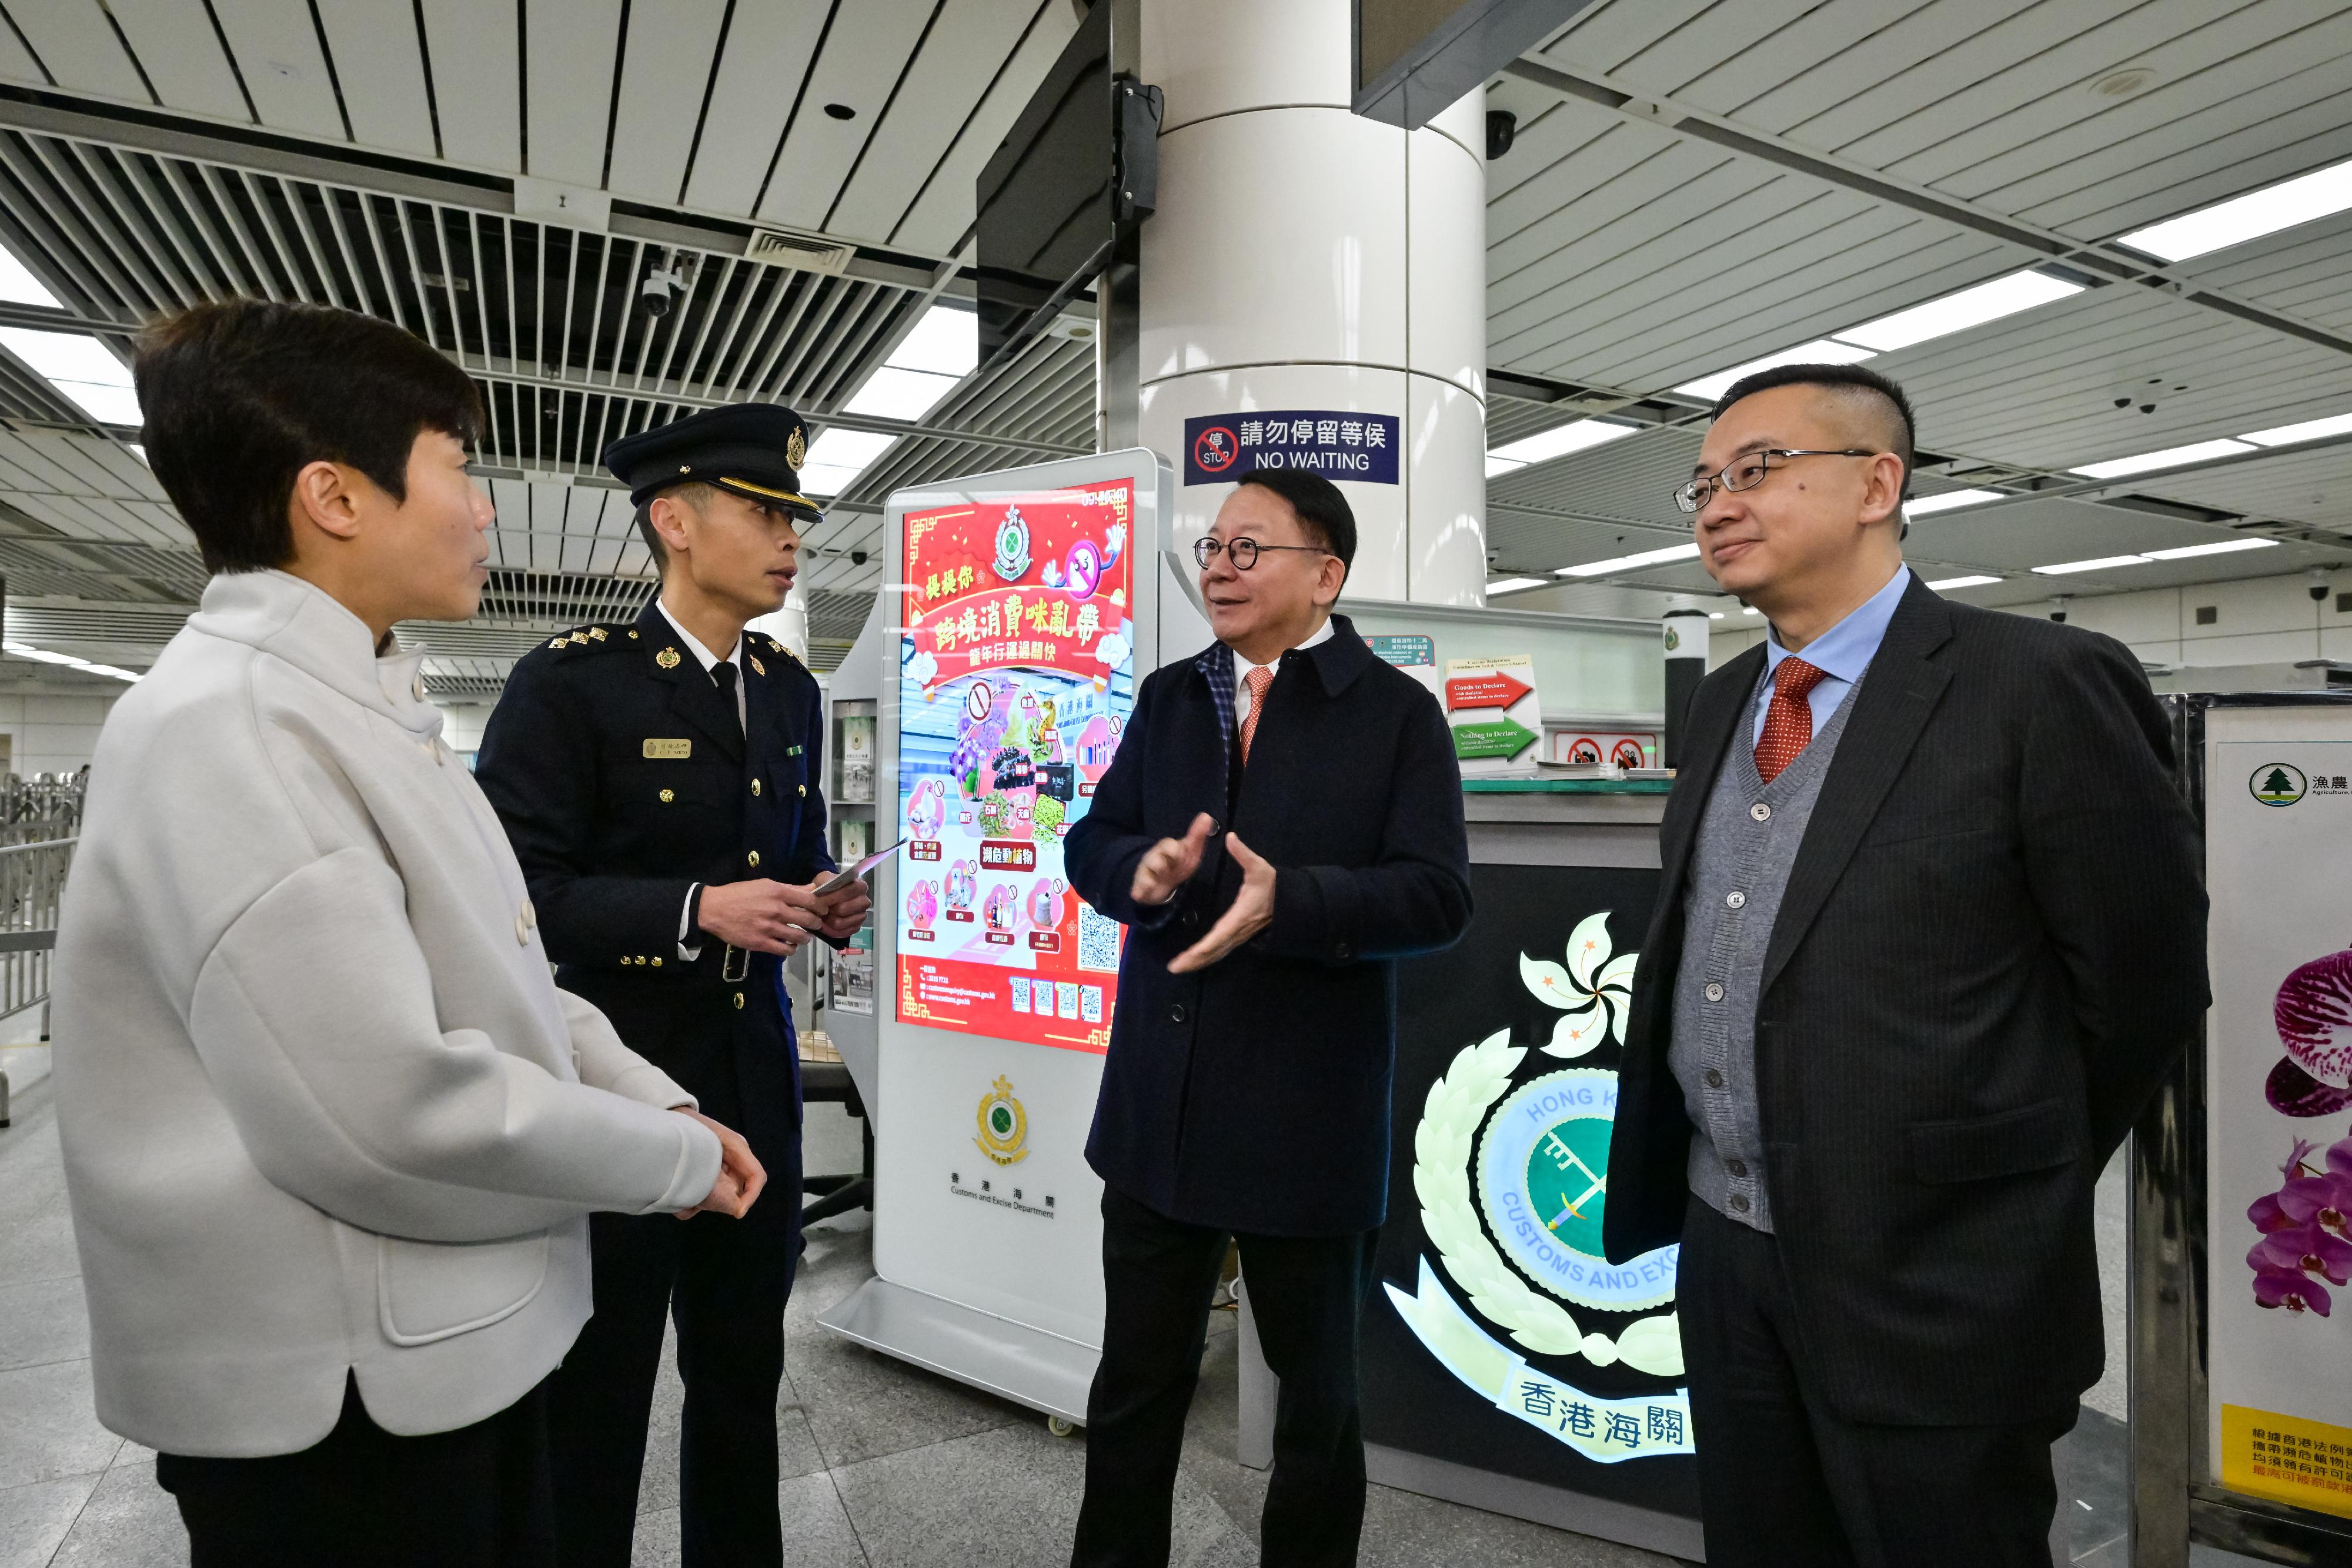 The Chief Secretary for Administration, Mr Chan Kwok-ki (second right), accompanied by the Commissioner of Customs and Excise, Ms Louise Ho (first left), and the Director of Immigration, Mr Benson Kwok (first right), visits the Shenzhen Bay Control Point to inspect its operations and receive a briefing from colleagues of the Customs and Excise Department today (February 10), on the first day of the Lunar New Year. He also thanks all the colleagues who are on duty during the Lunar New Year holidays.  
